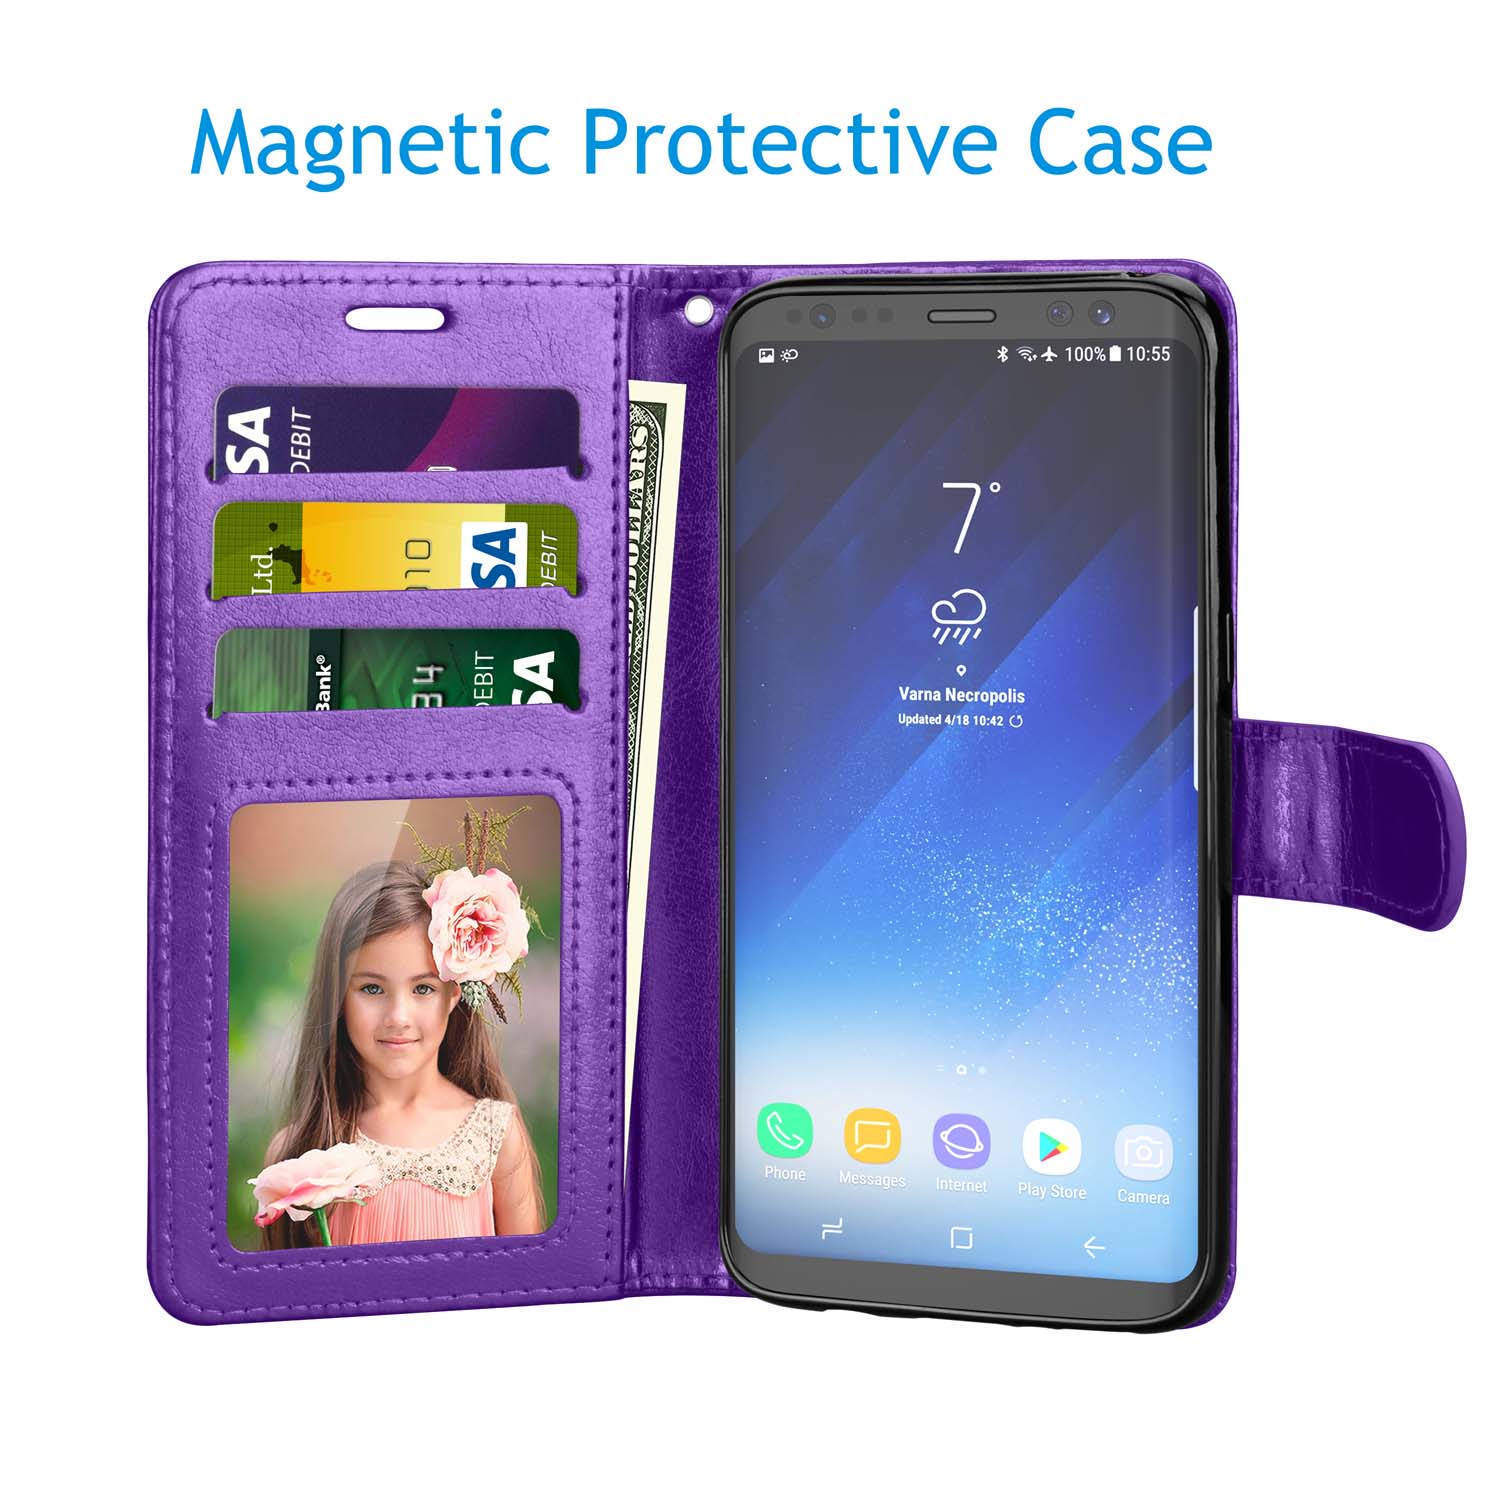 Tekcoo Galaxy S8 / S8 Plus Wallet Case, for Galaxy S8 / S8+ PU Leather Case, Tekcoo [Purple] PU Leather [3 Card Slots] ID Credit Flip Cover [Kickstand] Cover & Wrist Strap - image 4 of 5